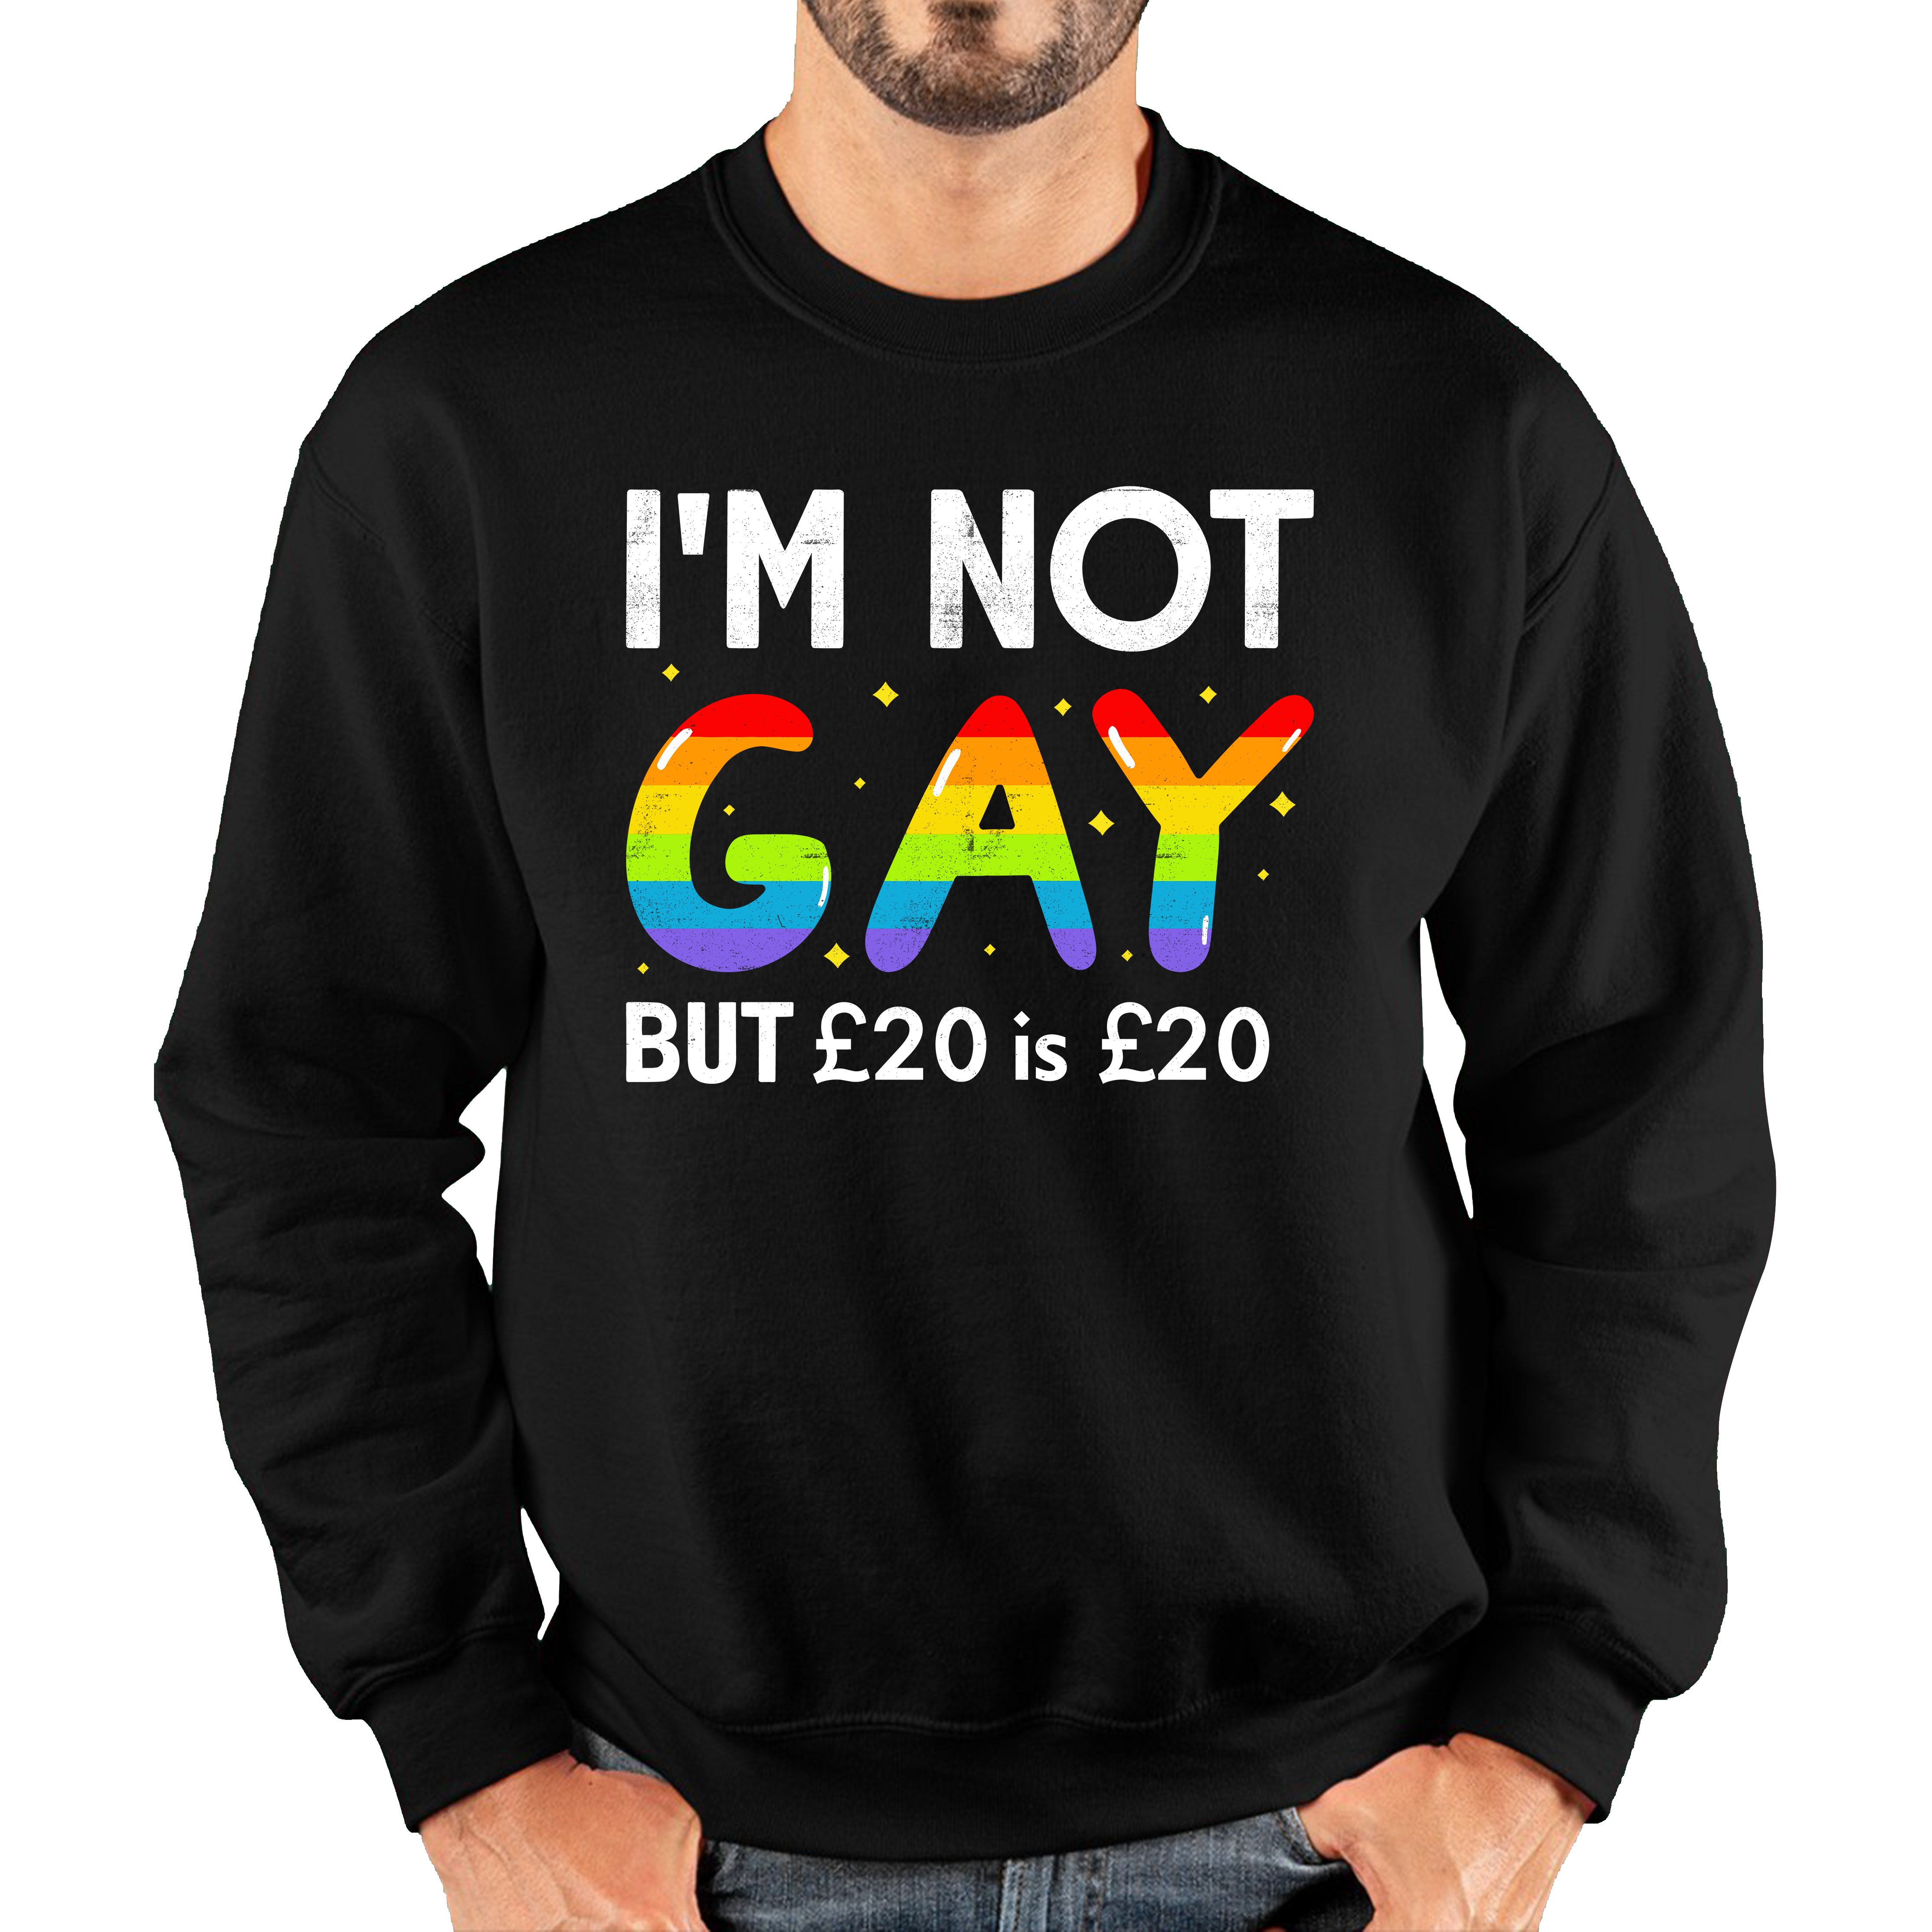 I'm Not Gay But 20 Pounds Is 20 Pounds Jumper Funny LGBT Gay Pride Joke Adult Sweatshirt